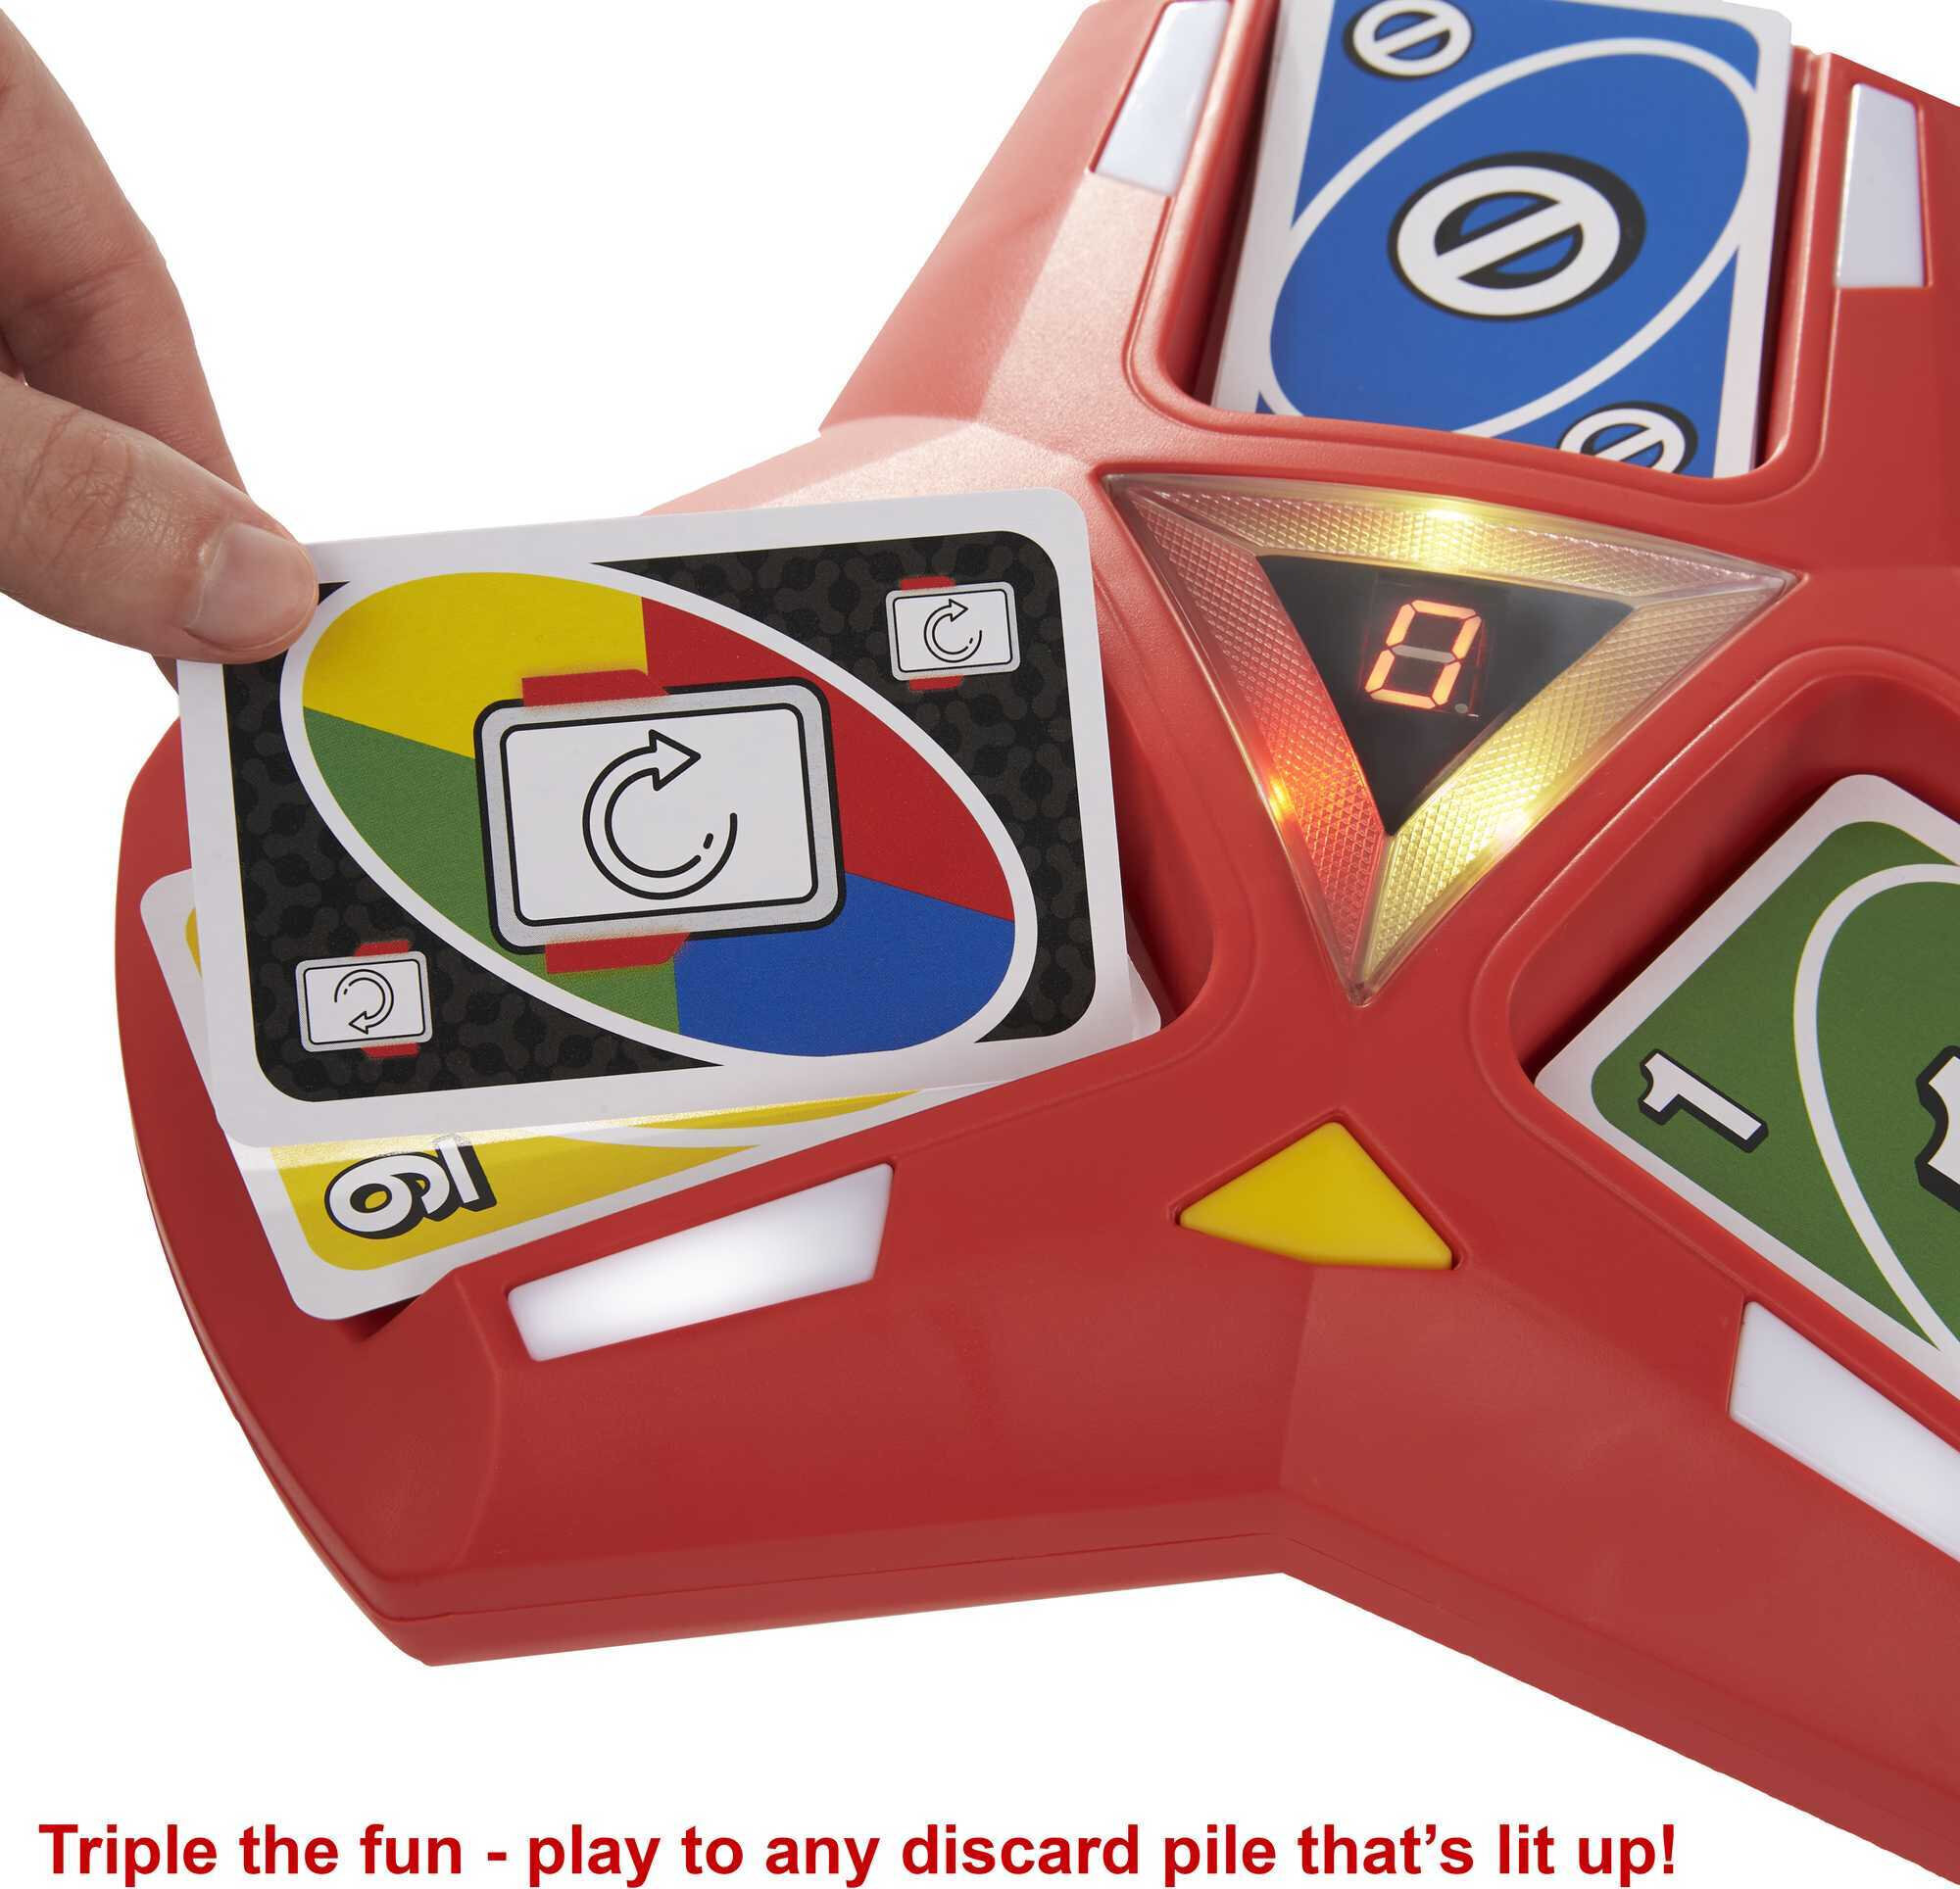 UNO Triple Play Card Game for Family Night Featuring 3 Discard Piles, Lights & Sounds - image 4 of 8